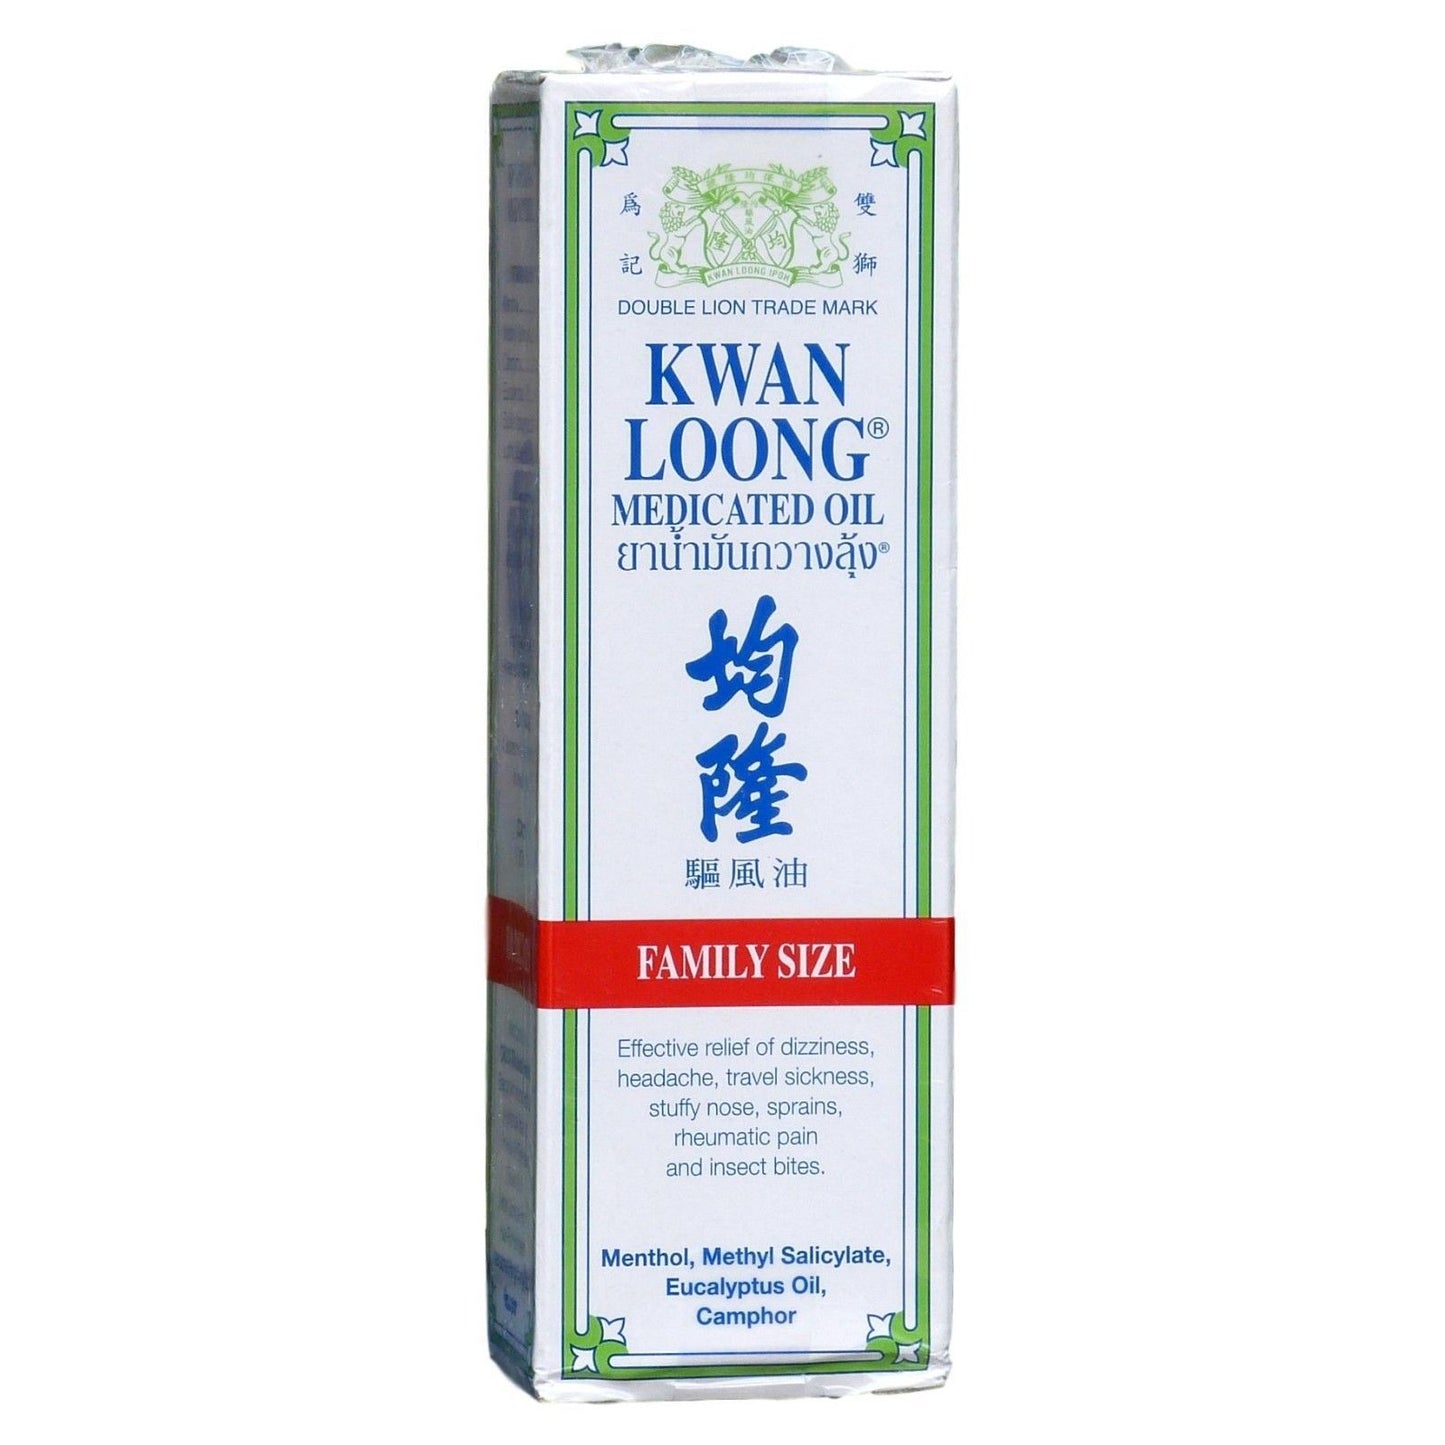 Kwan Loong Medicated Oil Muscle Aches Pain Stuffy Nose Insect Bites 57ml - Asian Beauty Supply